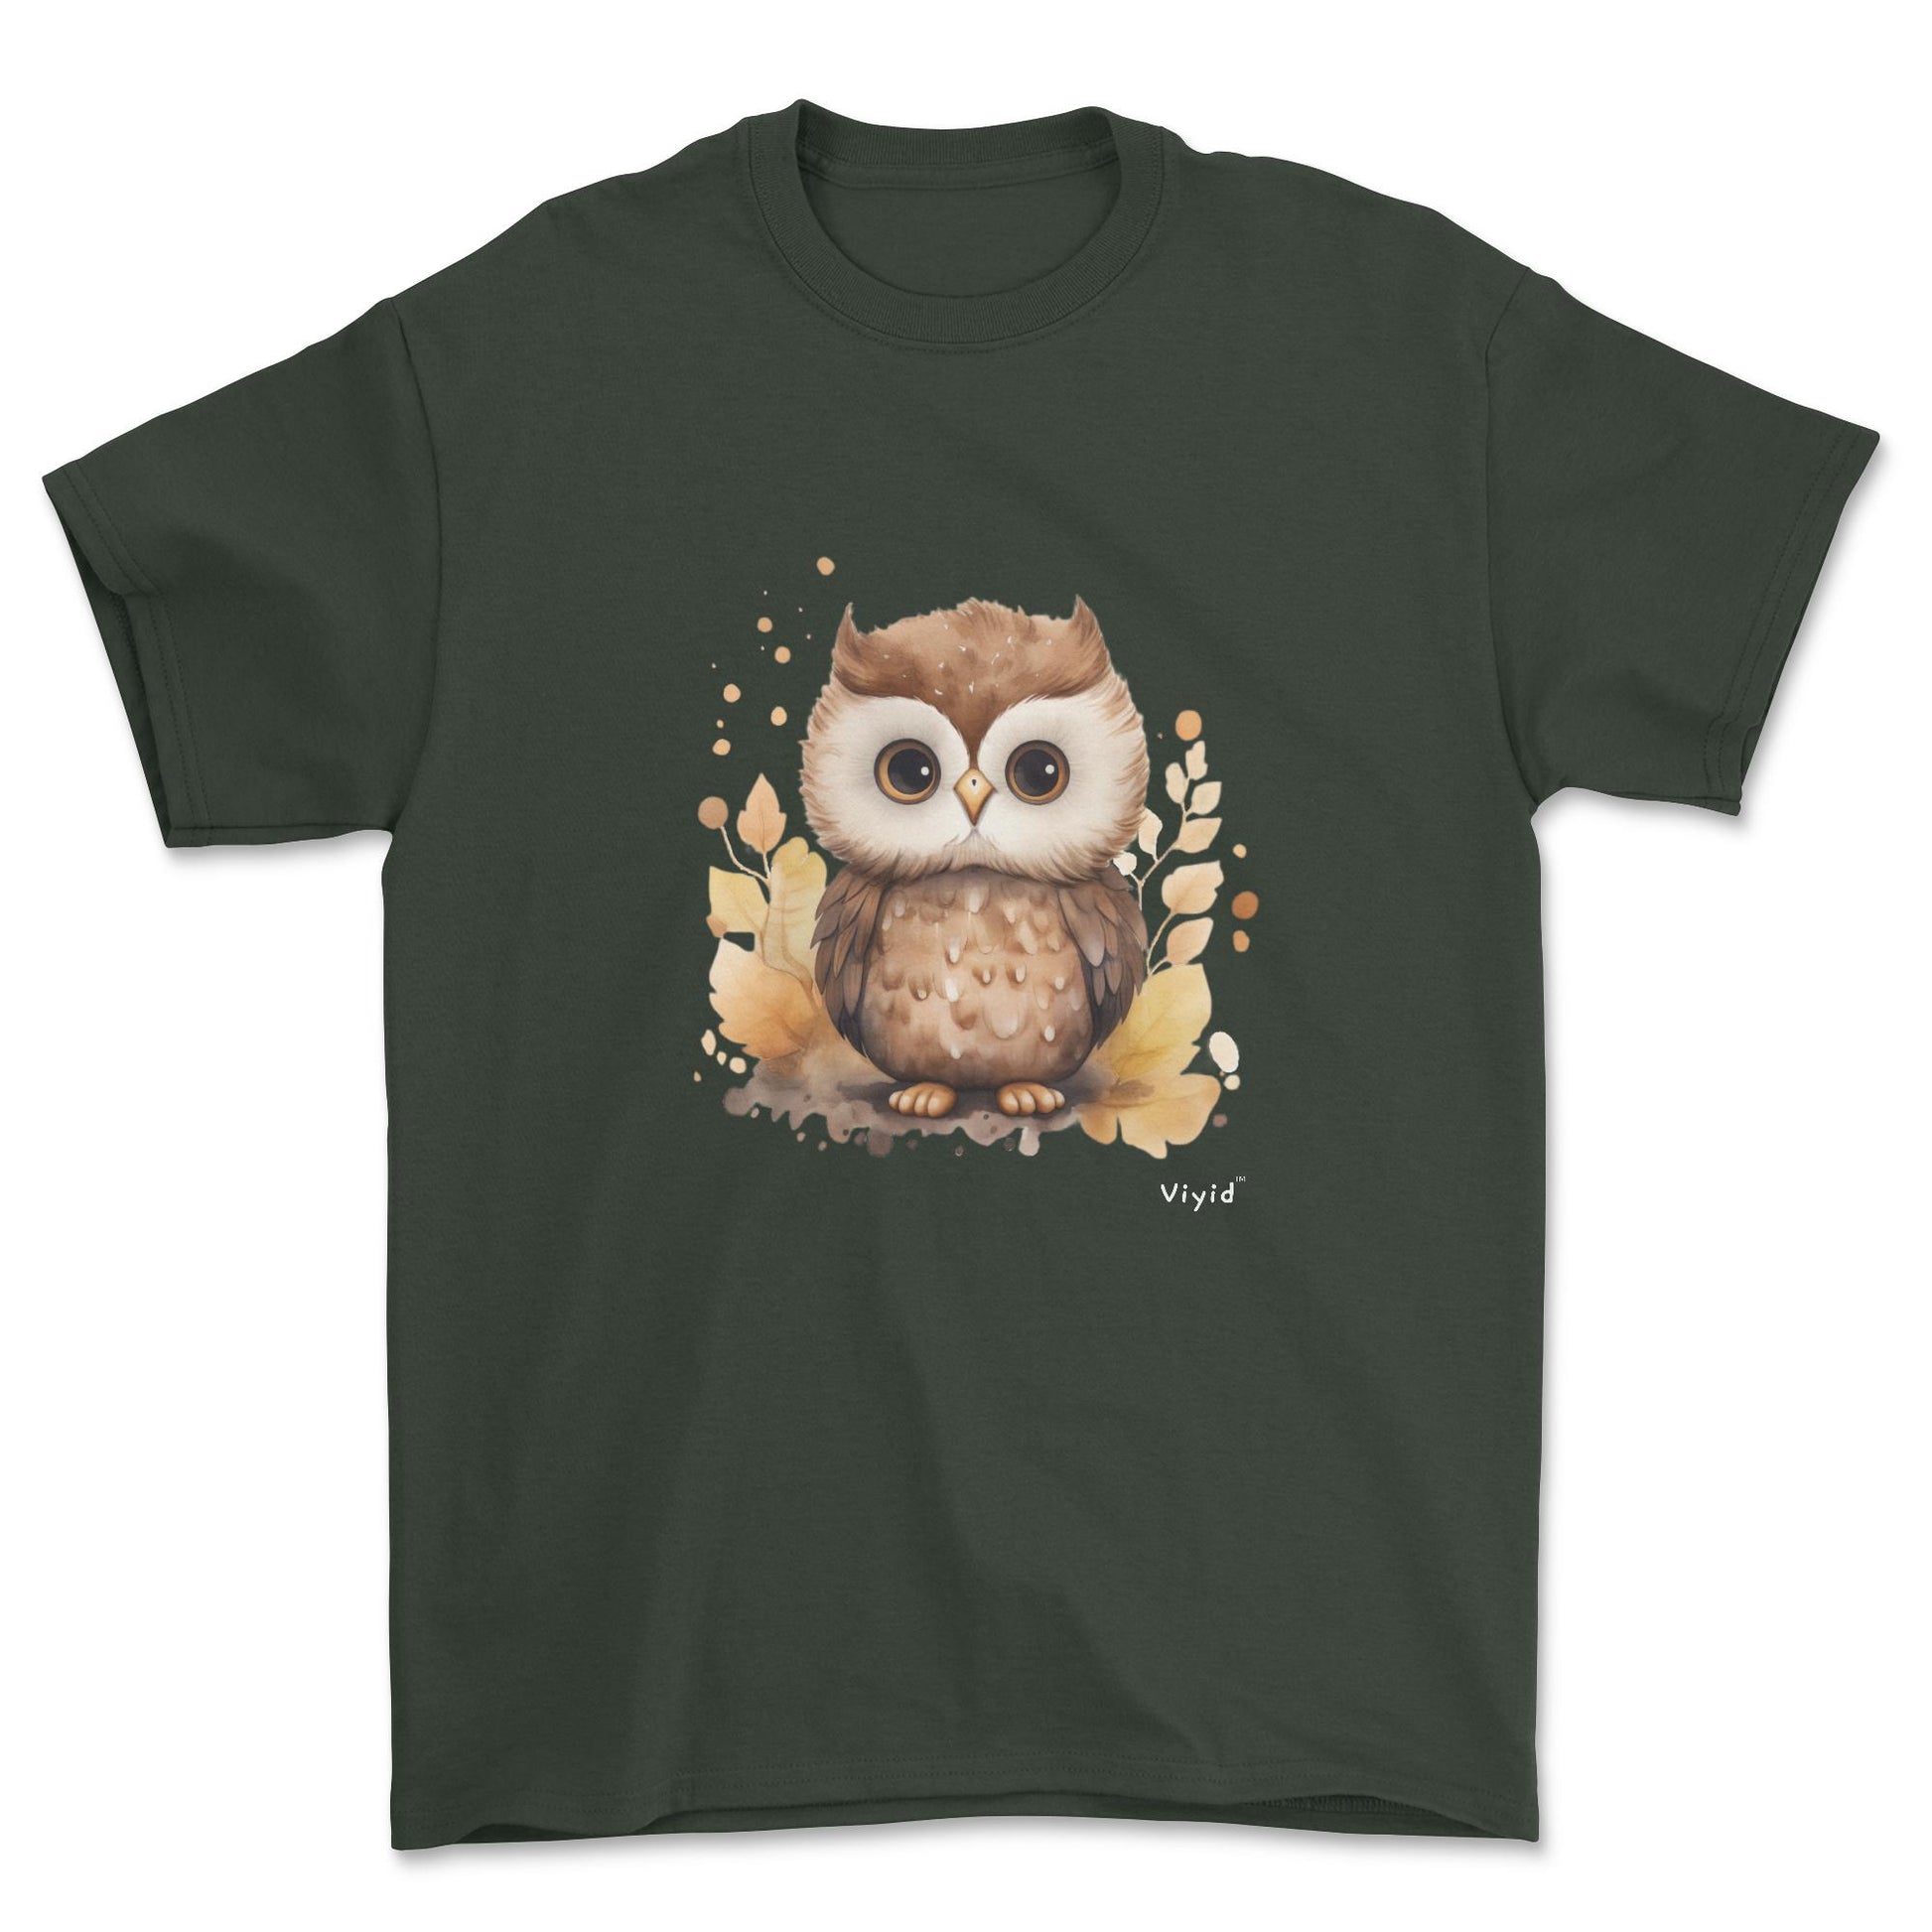 nocturnal owl adult t-shirt forest green